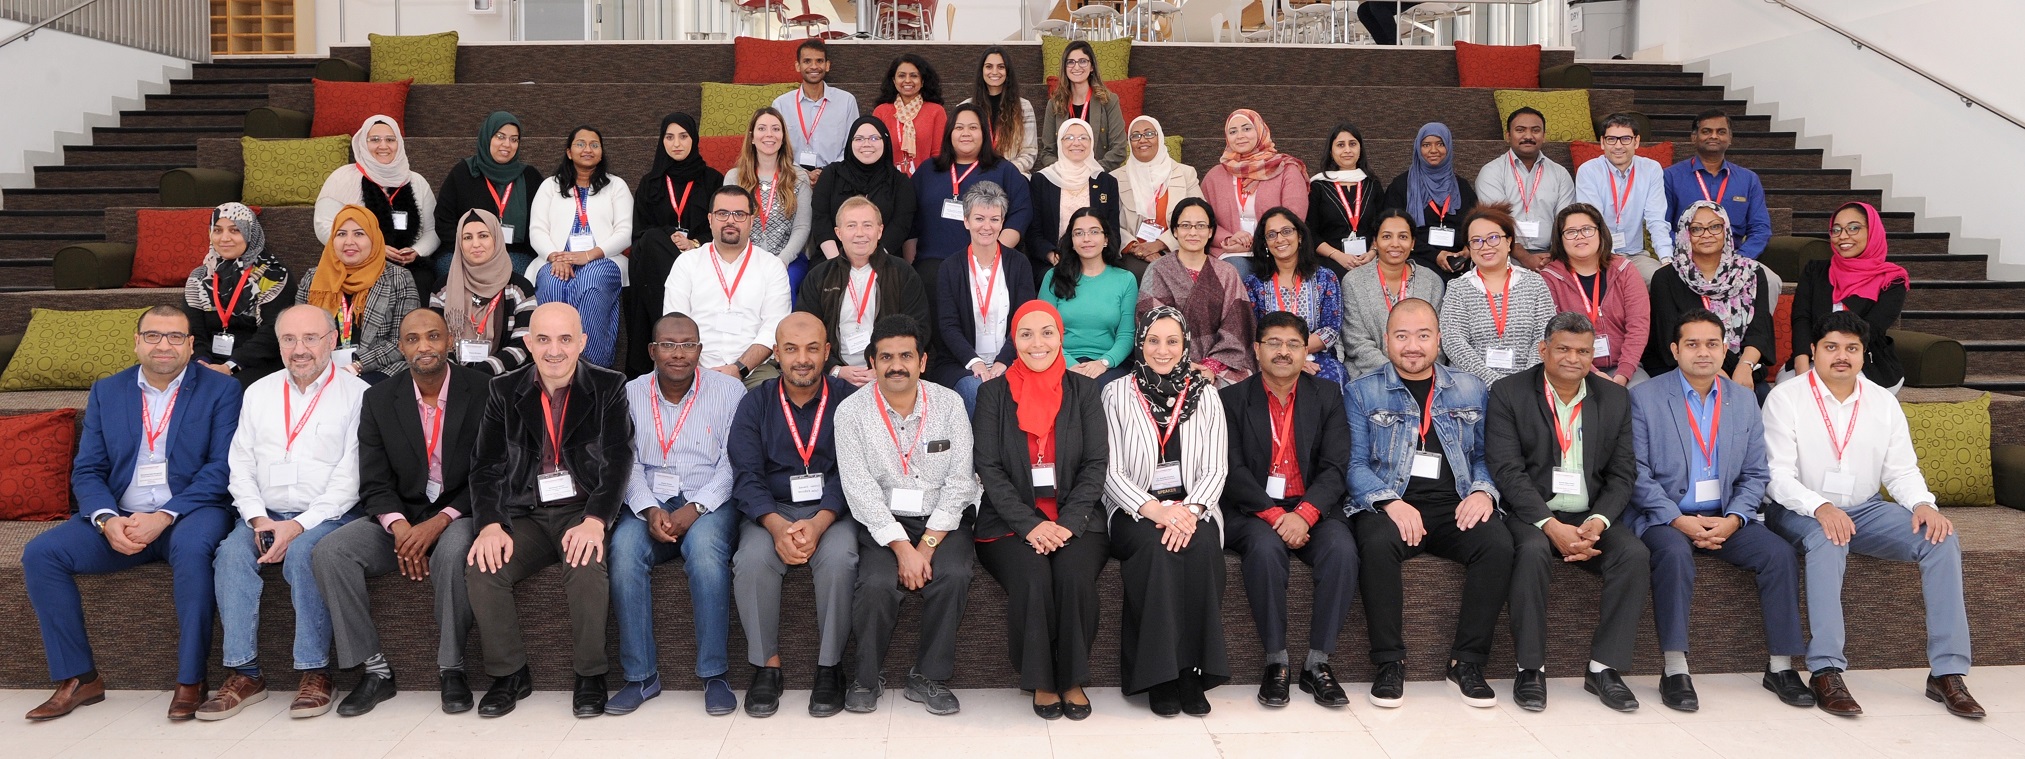 WCM-Q systematic review workshop boosts scientific rigor in medical research